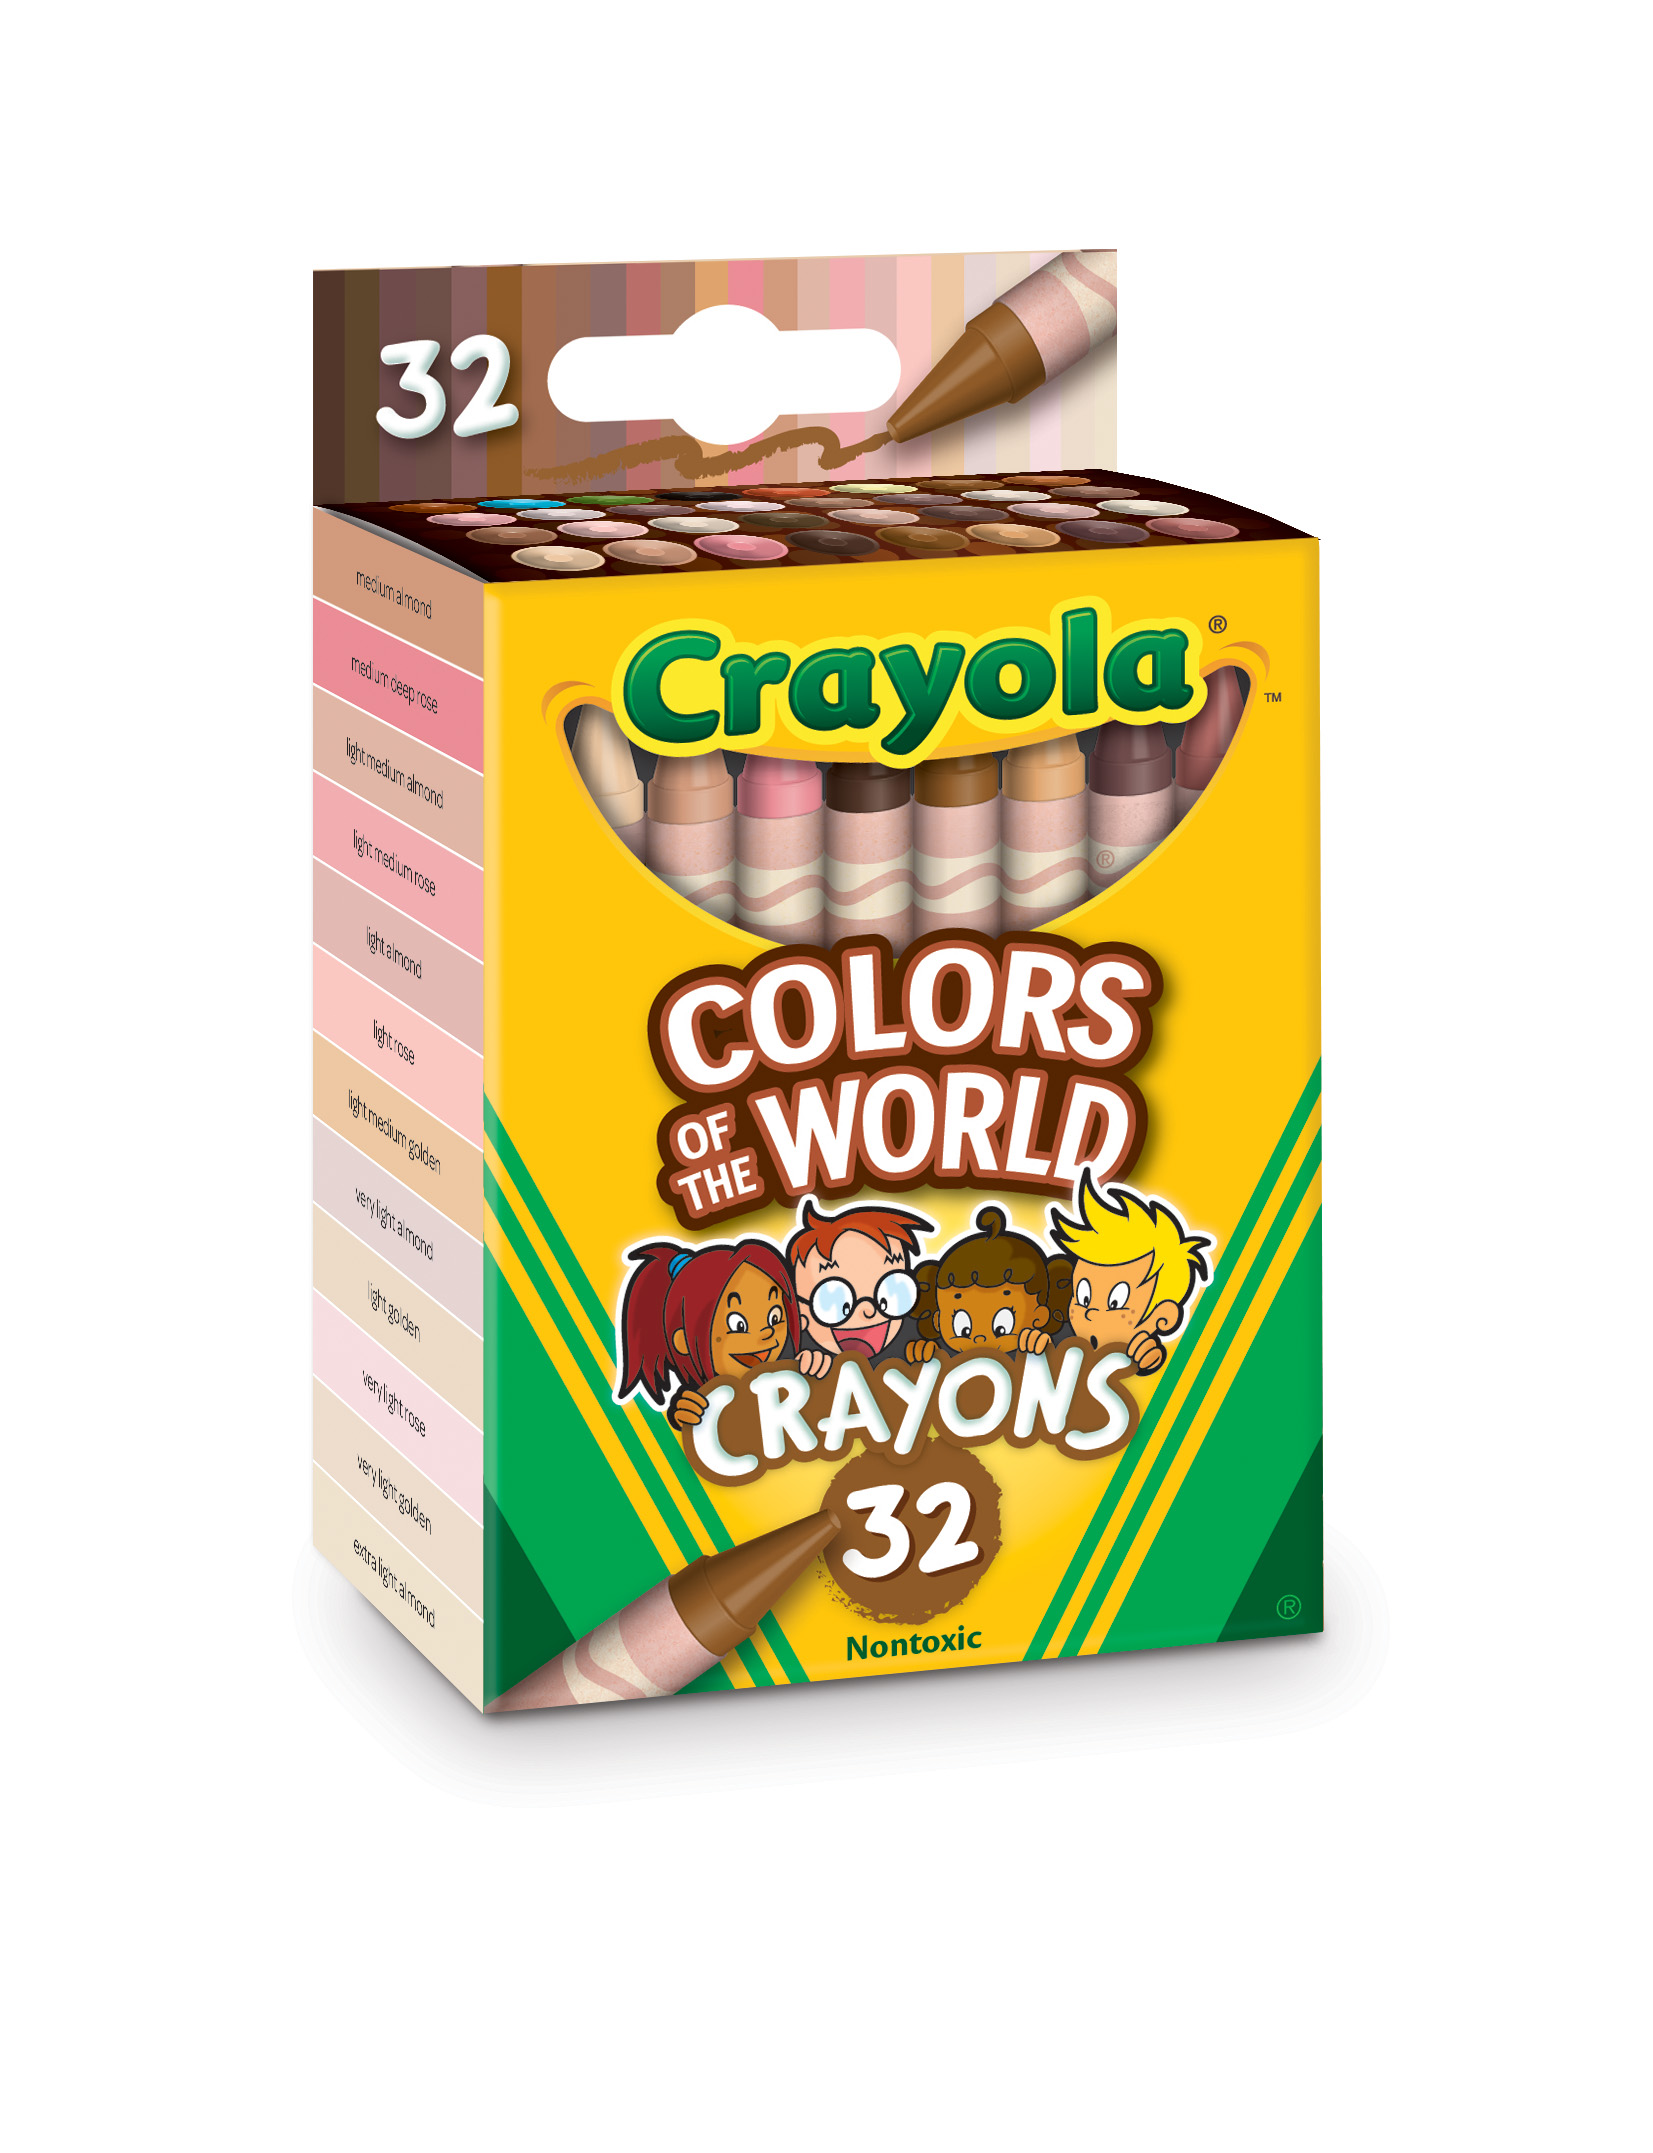 Crayola Colors of the World Skin Tone Crayons, 32 Ct, Back to School Supplies, Unisex Child - image 1 of 6